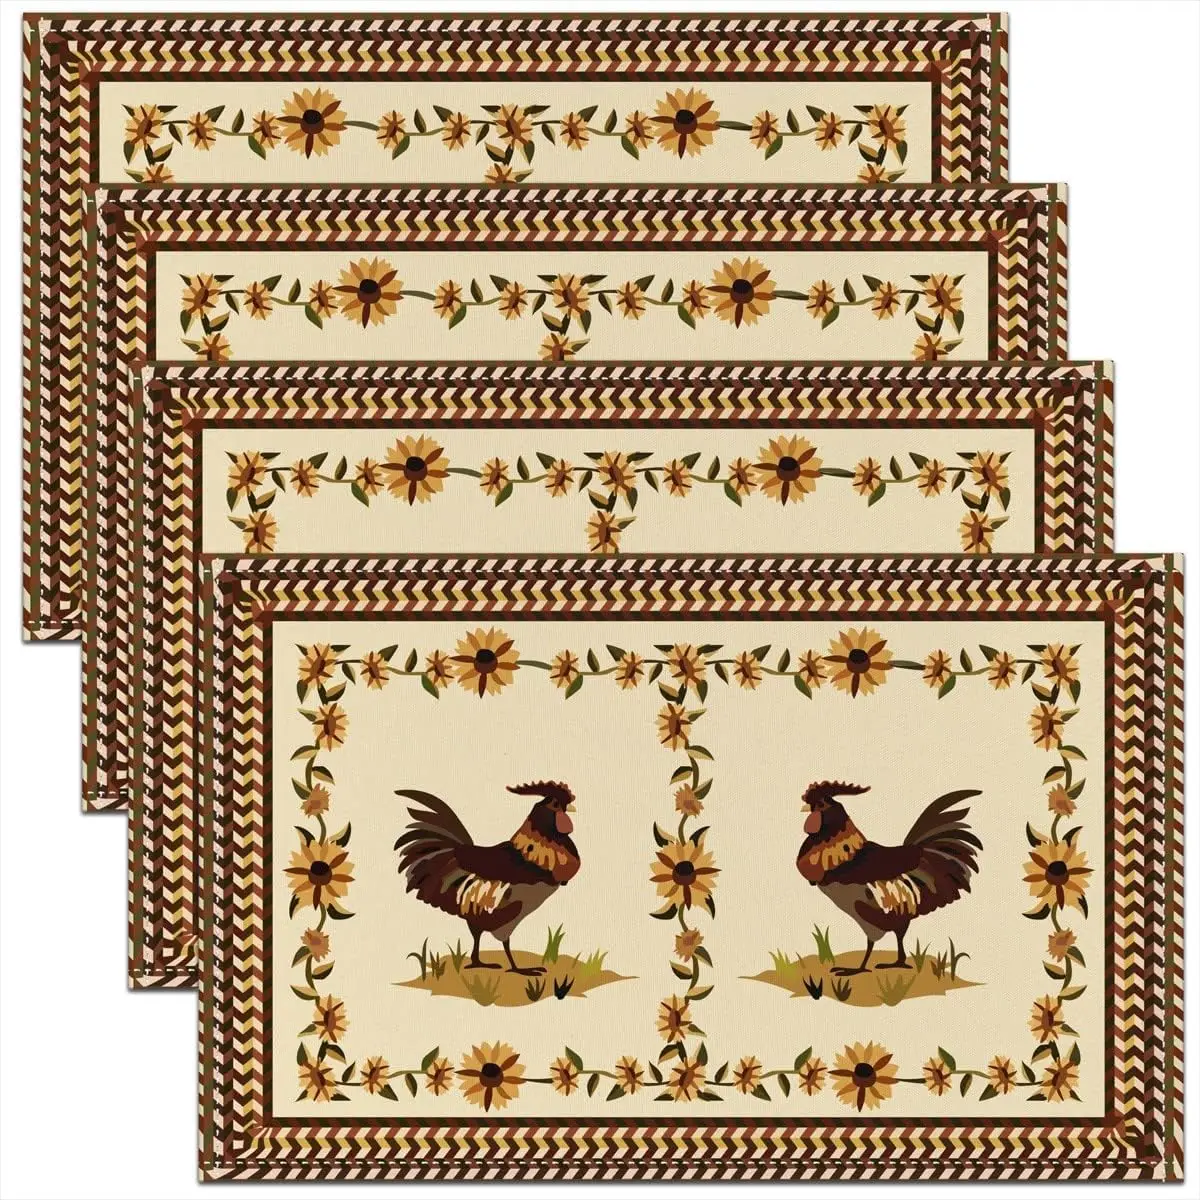 

Cock Placemats Set of 4,Farm Animals Theme Washable Place Mats 12x18 Inch for Dining Table Decorations Flower Floral Table Mats